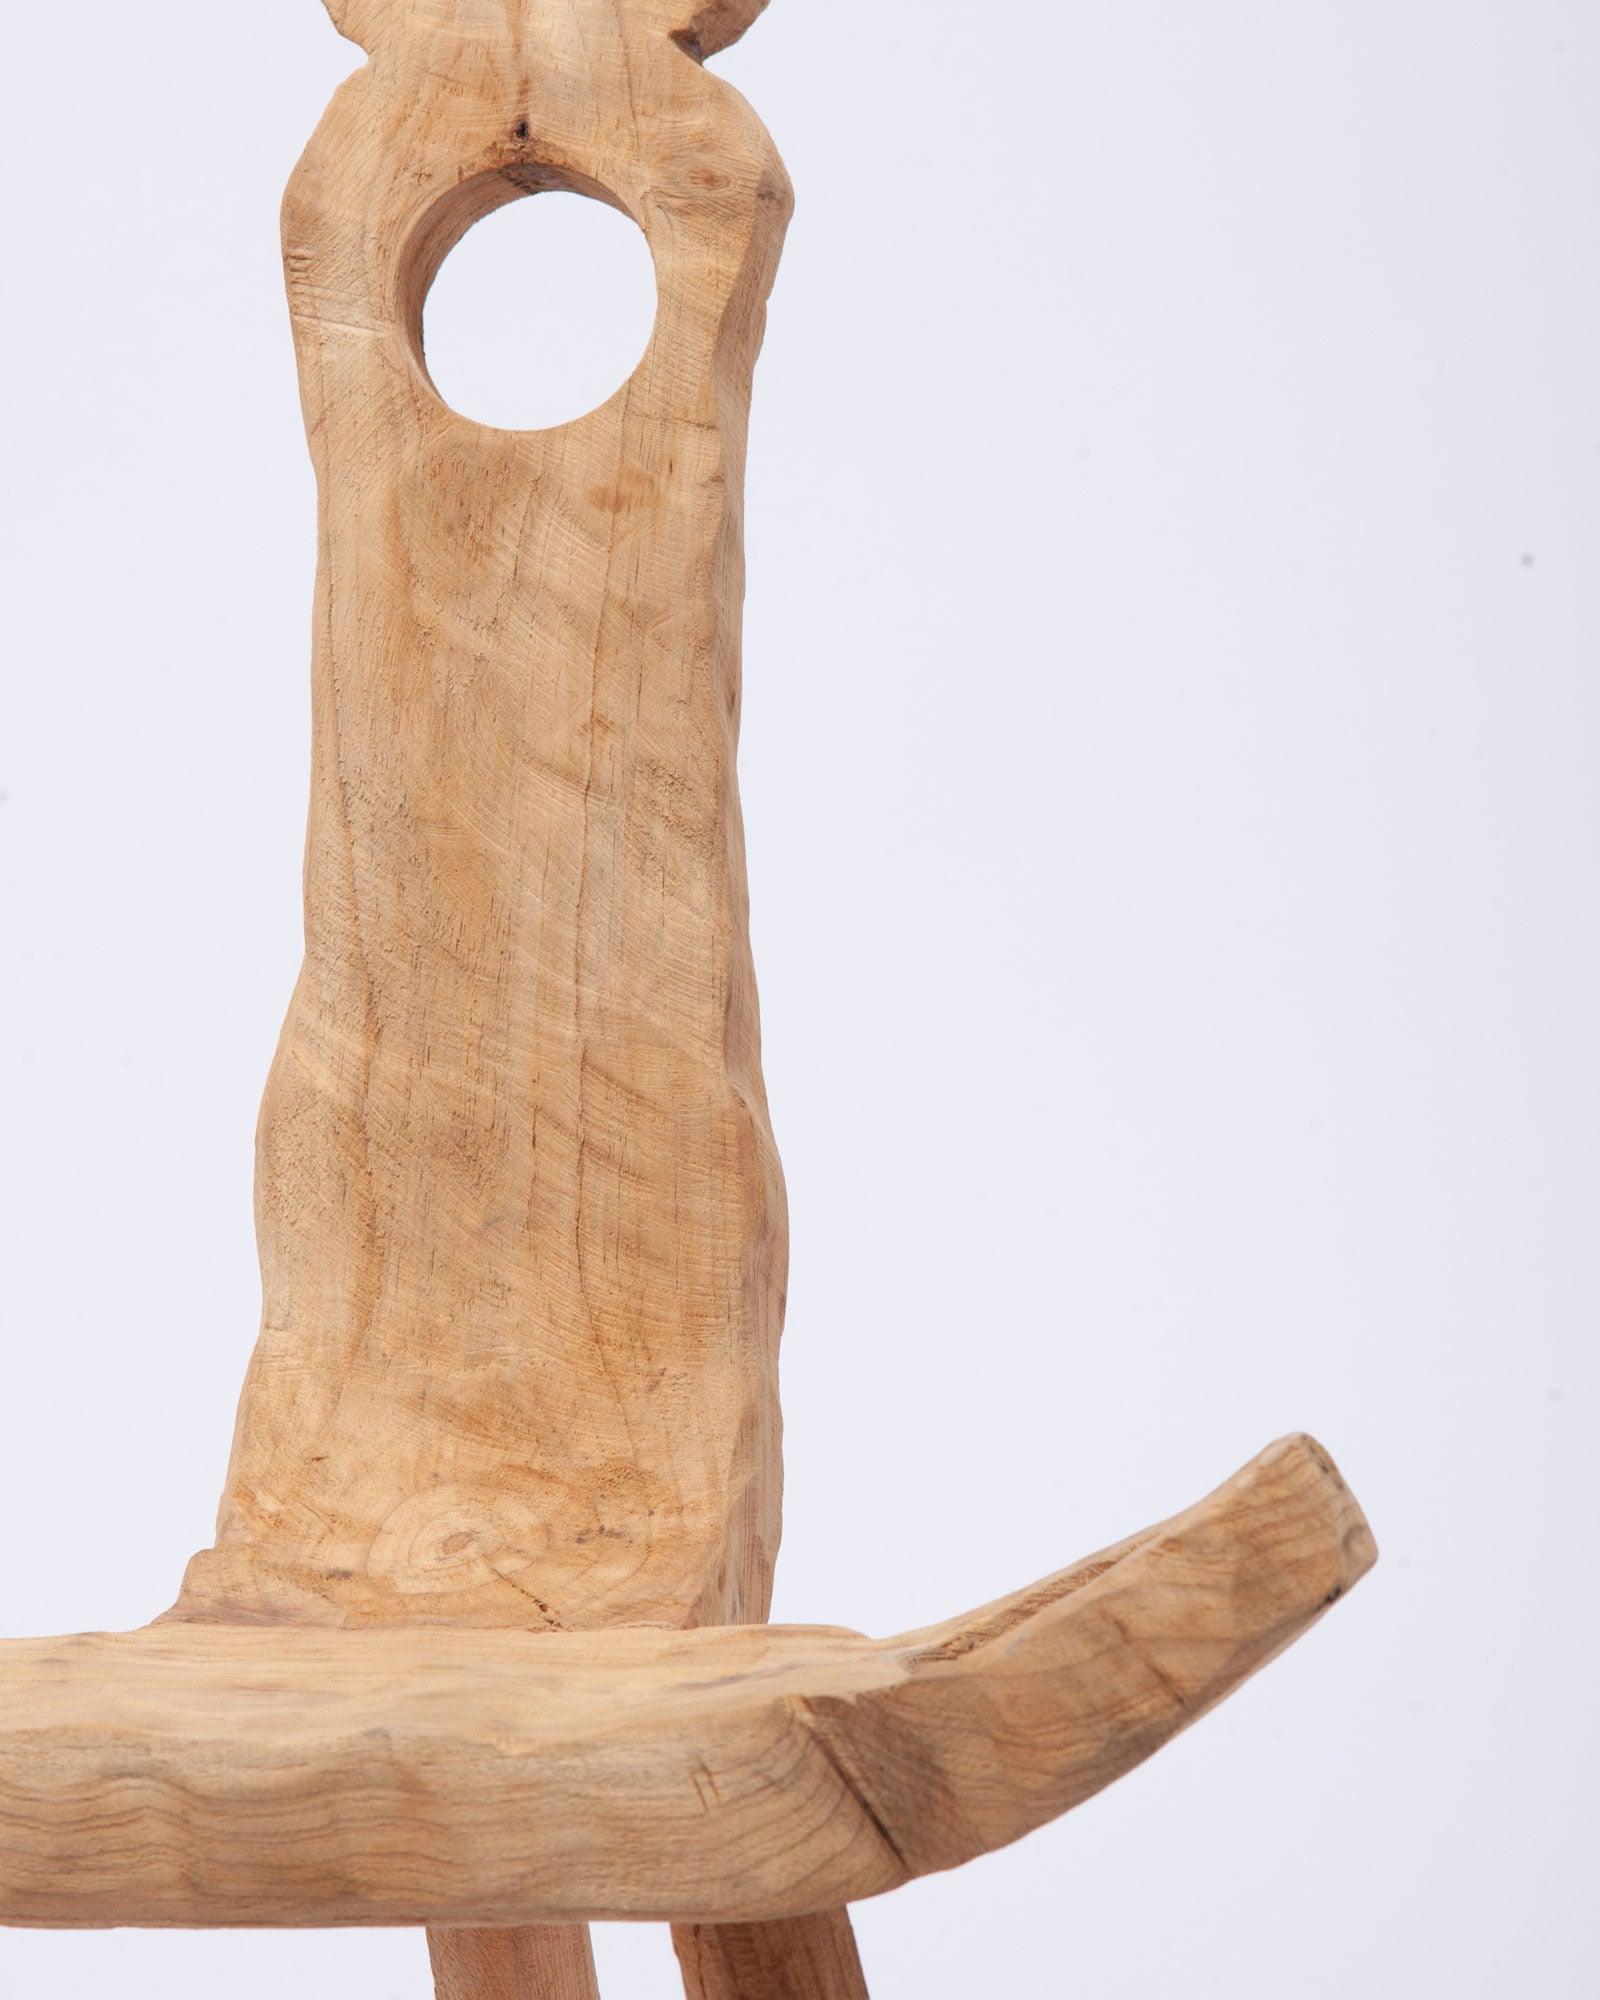 Close-up view of the seat and part of the hand-carved wooden collectible frame in white background